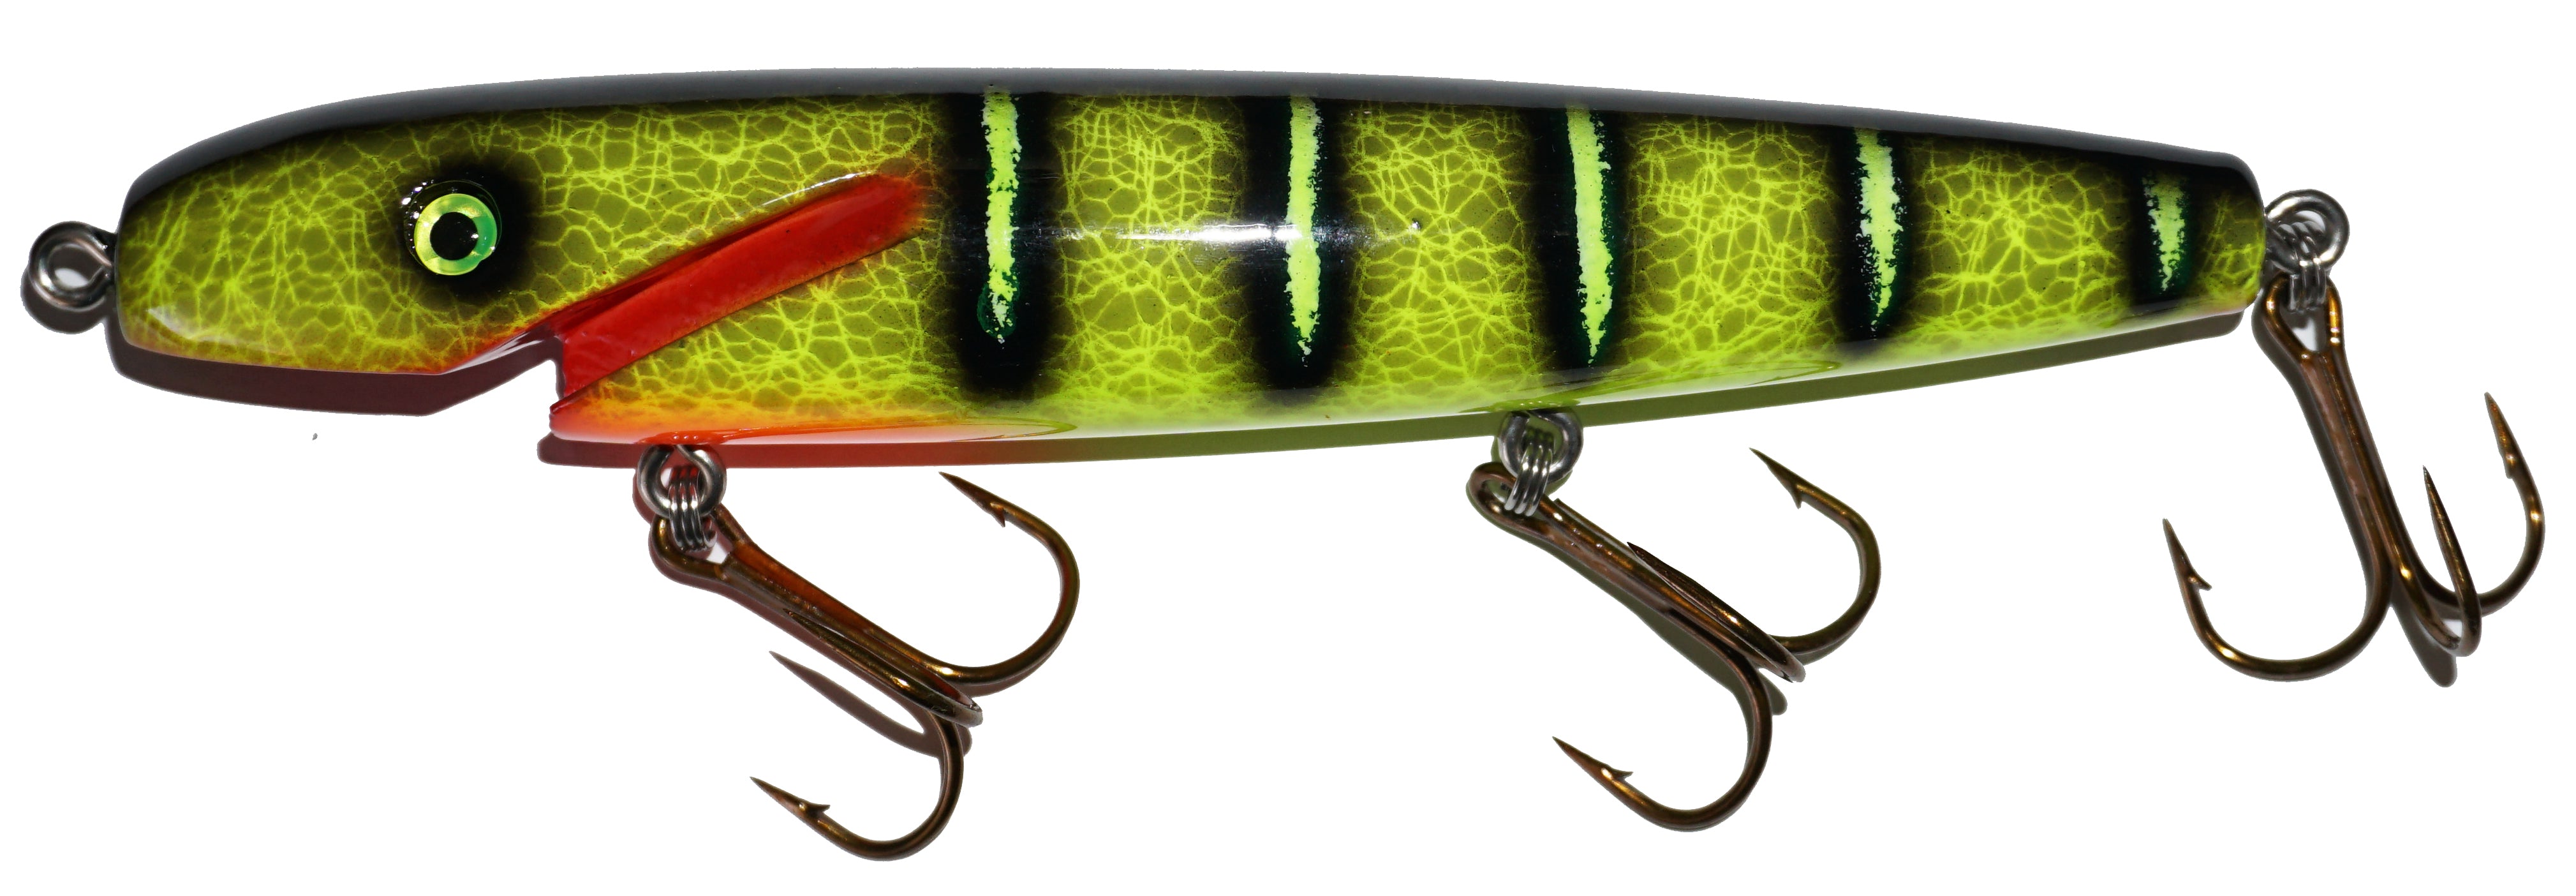 Leo Lures 6 Jerk/Rubber Tail, Rubber Musky Lures